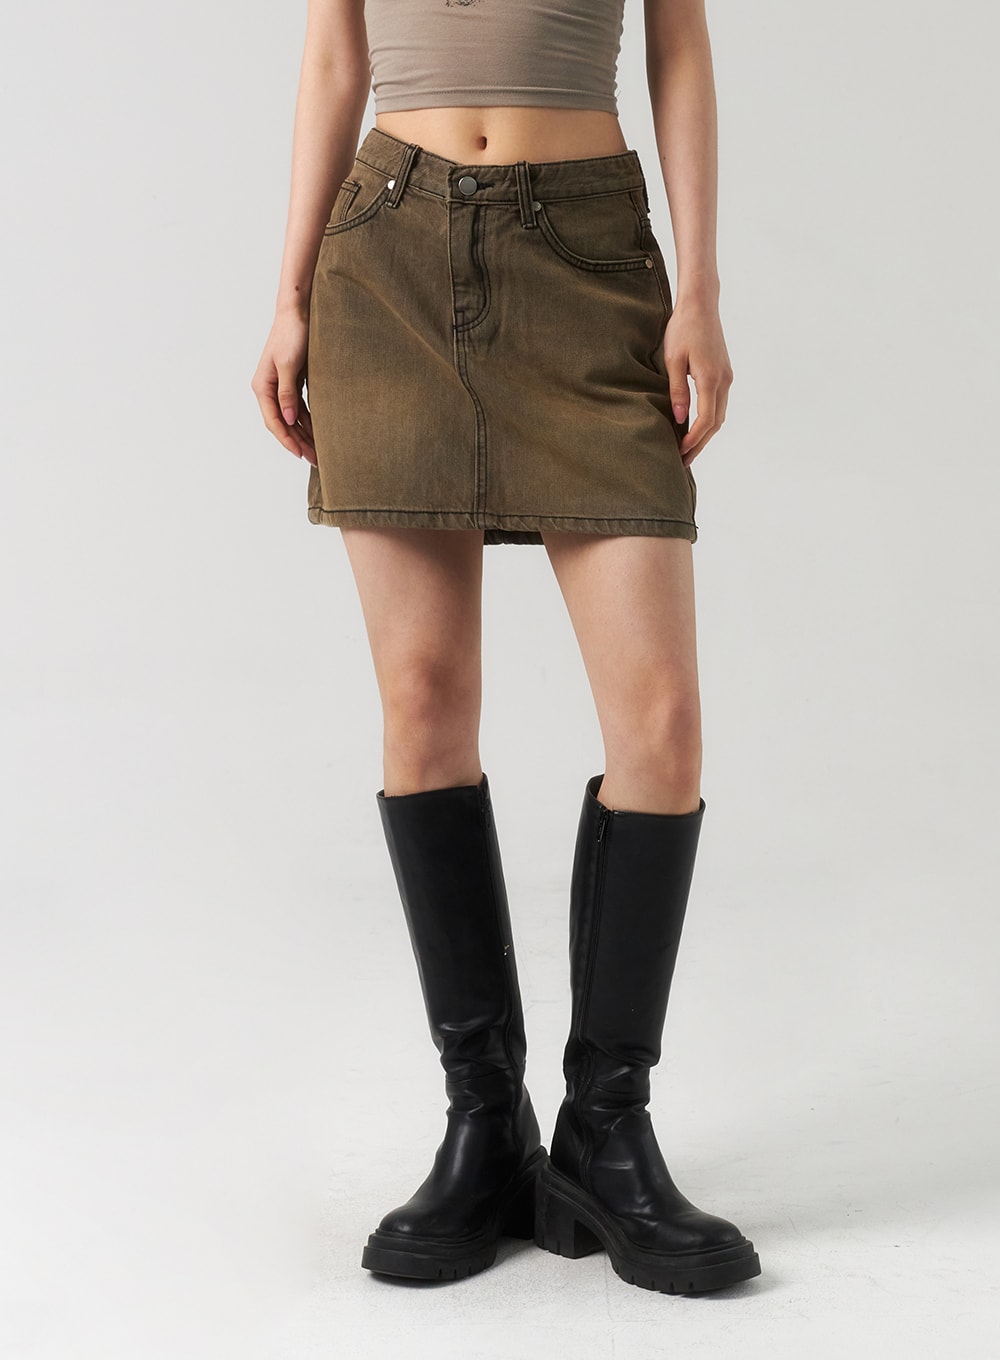 Denim & Jeans Skirts in Brown color for girls | FASHIOLA INDIA